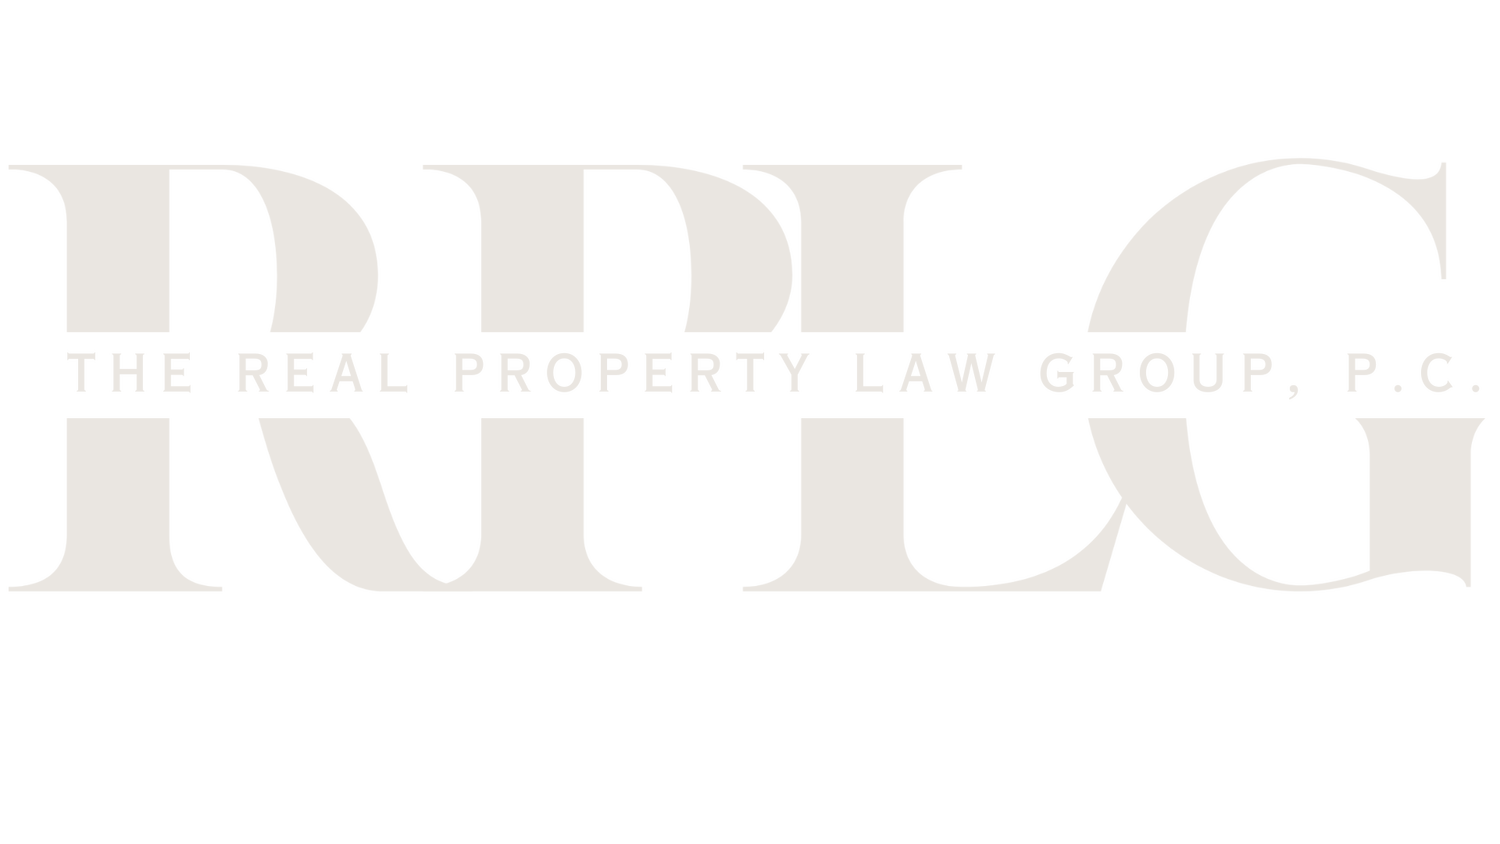 The Real Property Law Group, P.C.